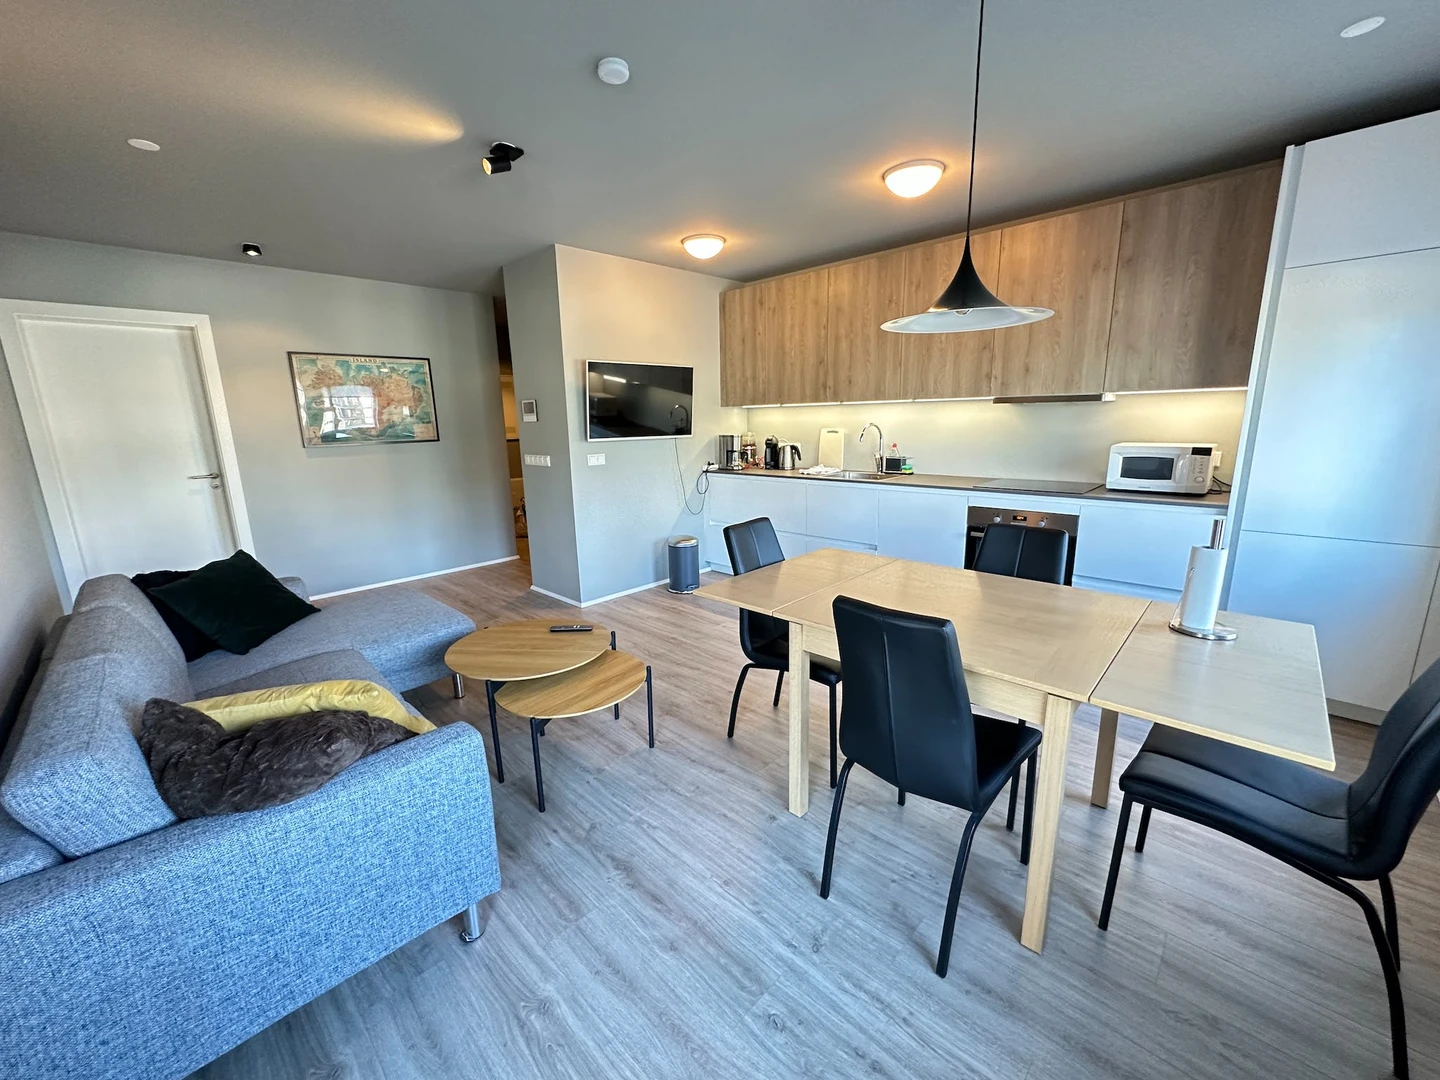 Accommodation with 3 bedrooms in Reykjavík